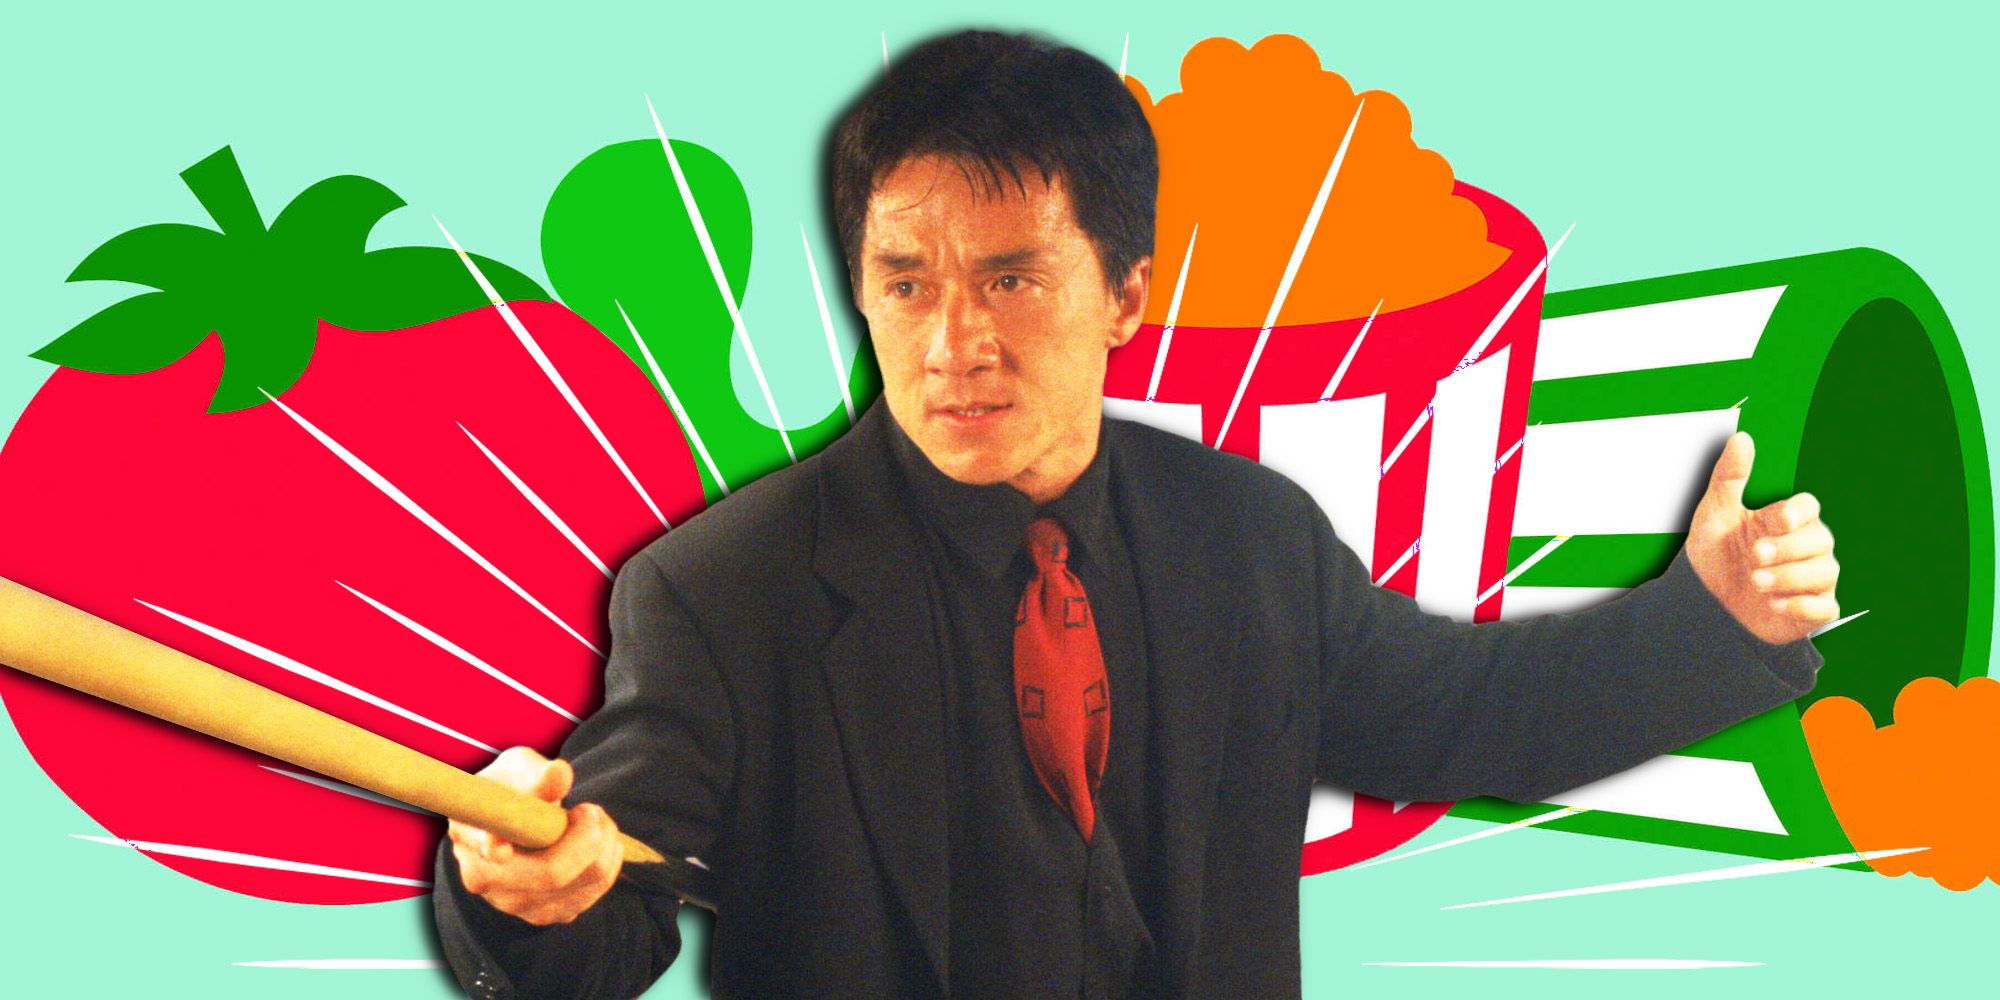 Jackie Chan from Rush Hour with Rotten Tomatoes logos in background